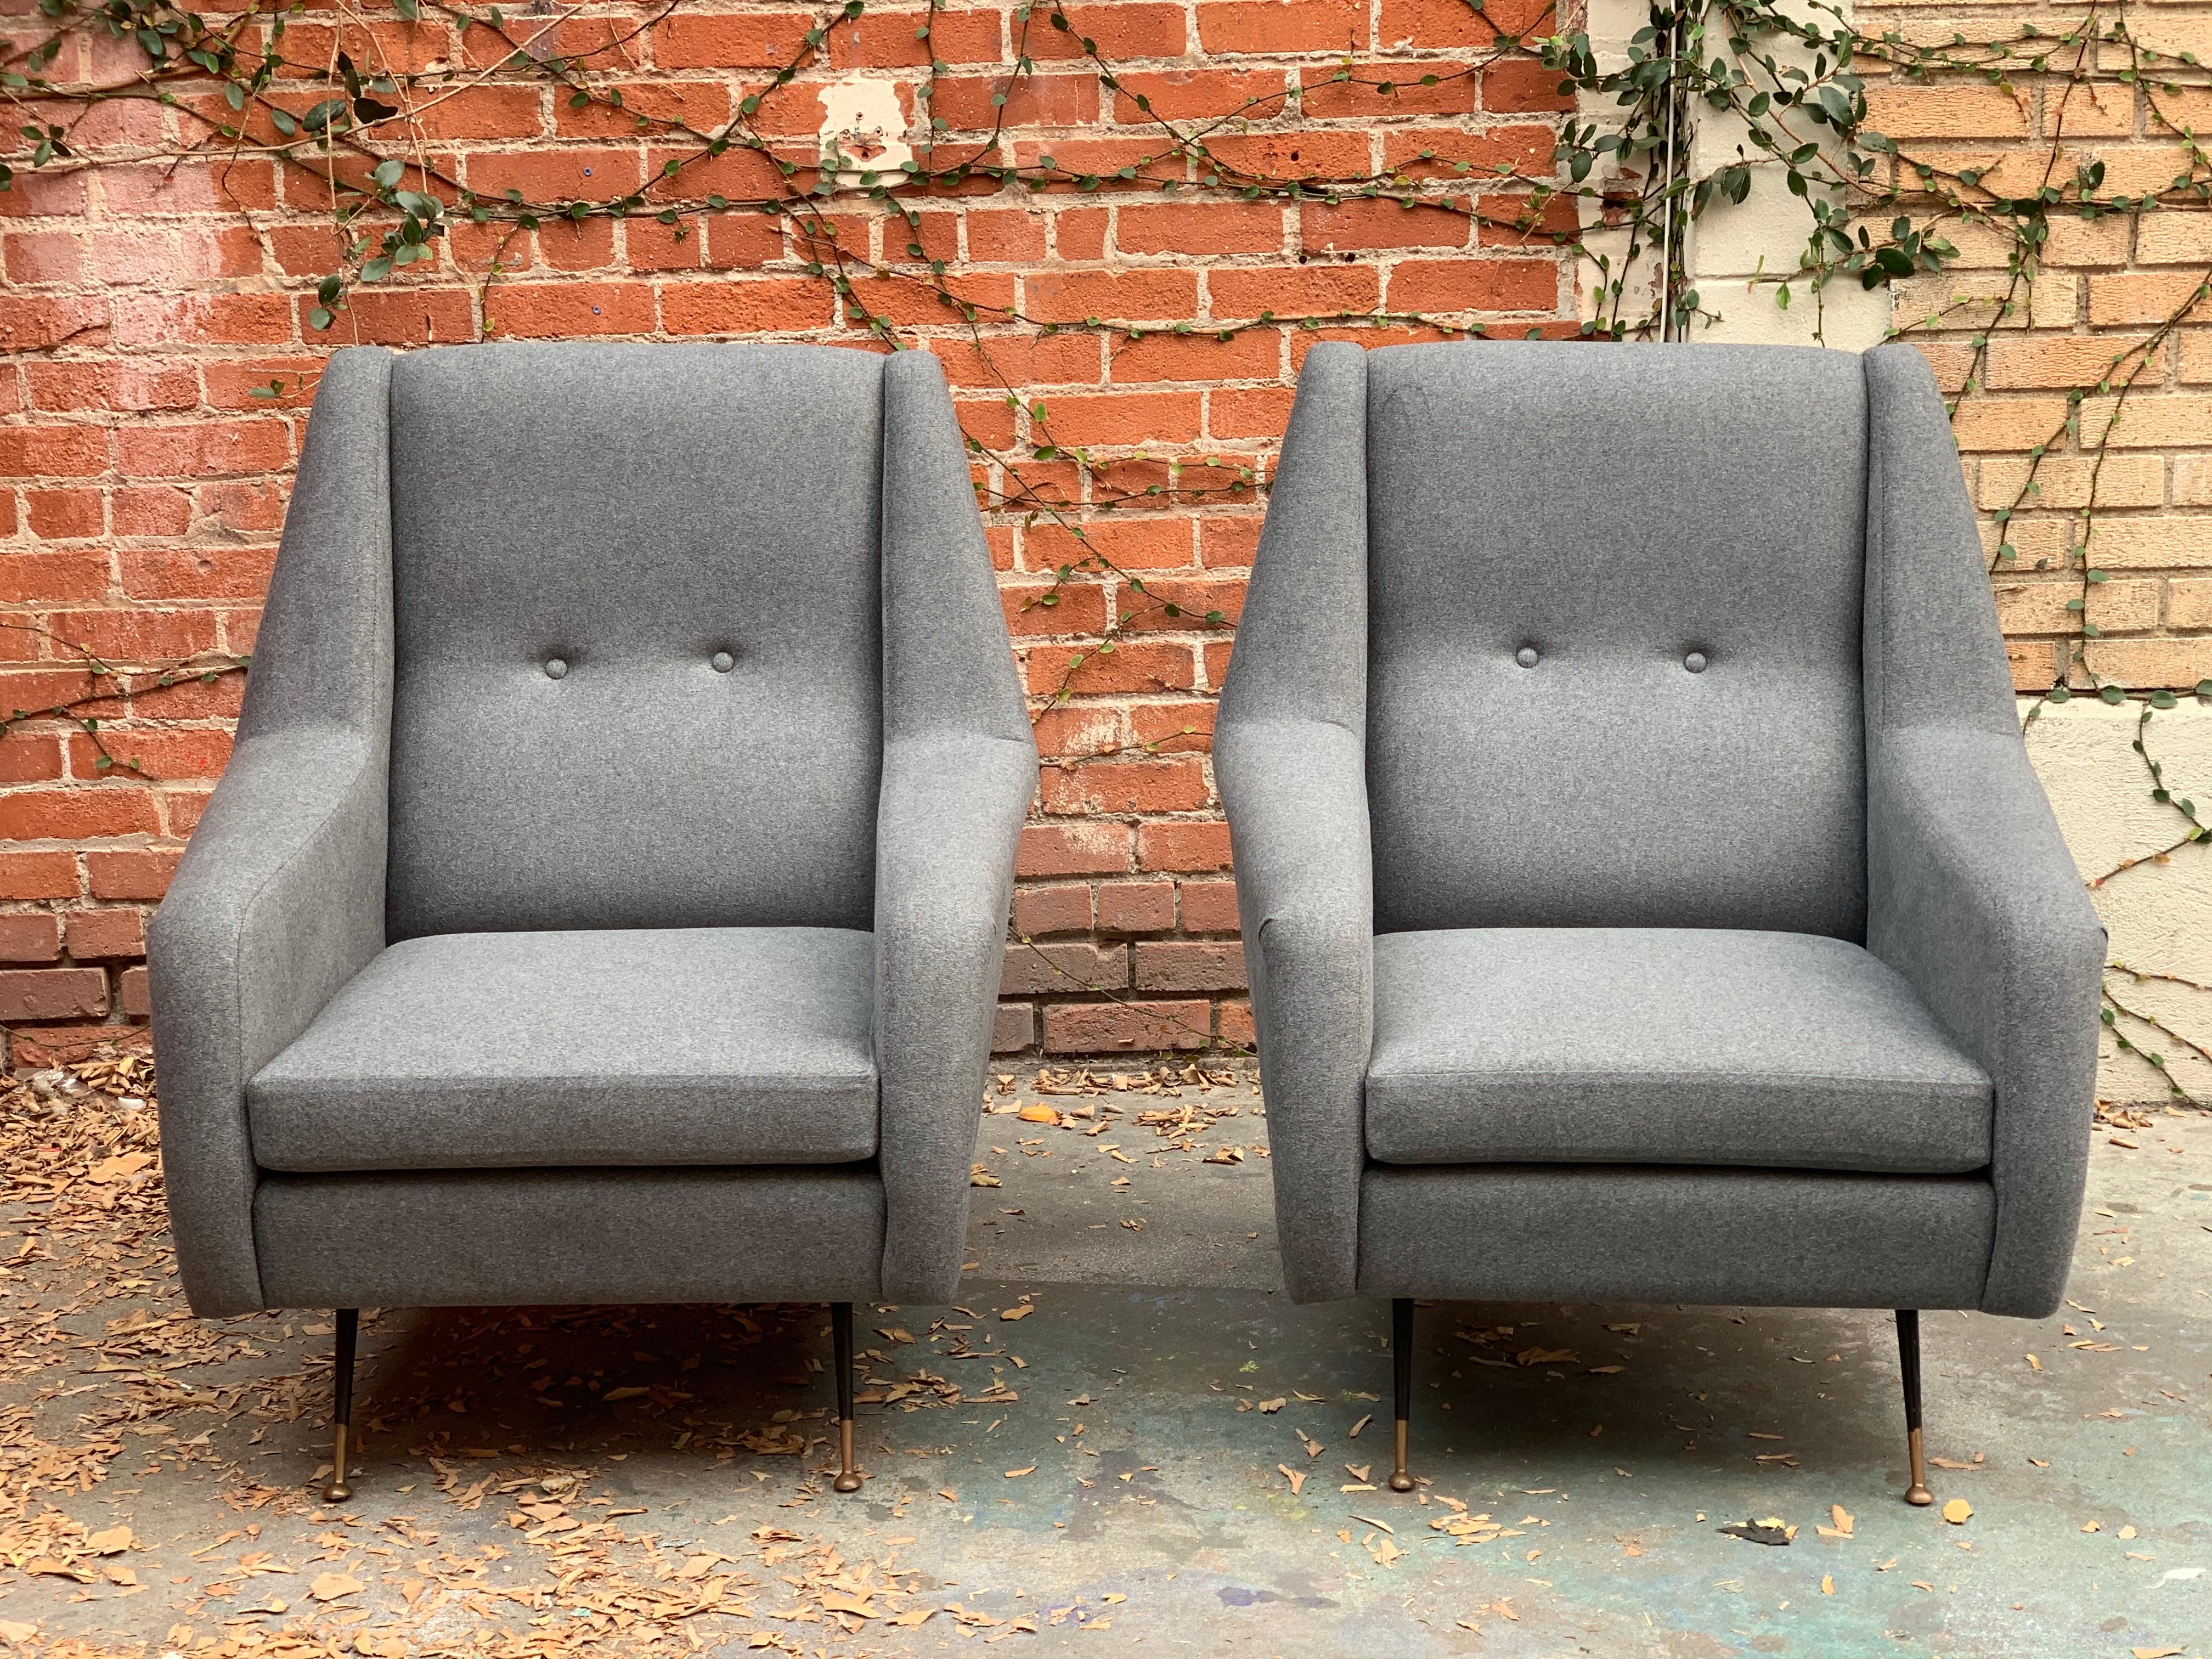 20th Century Pair of Italian Midcentury Tufted Chairs by Ico Parisi in Grey Flannel For Sale